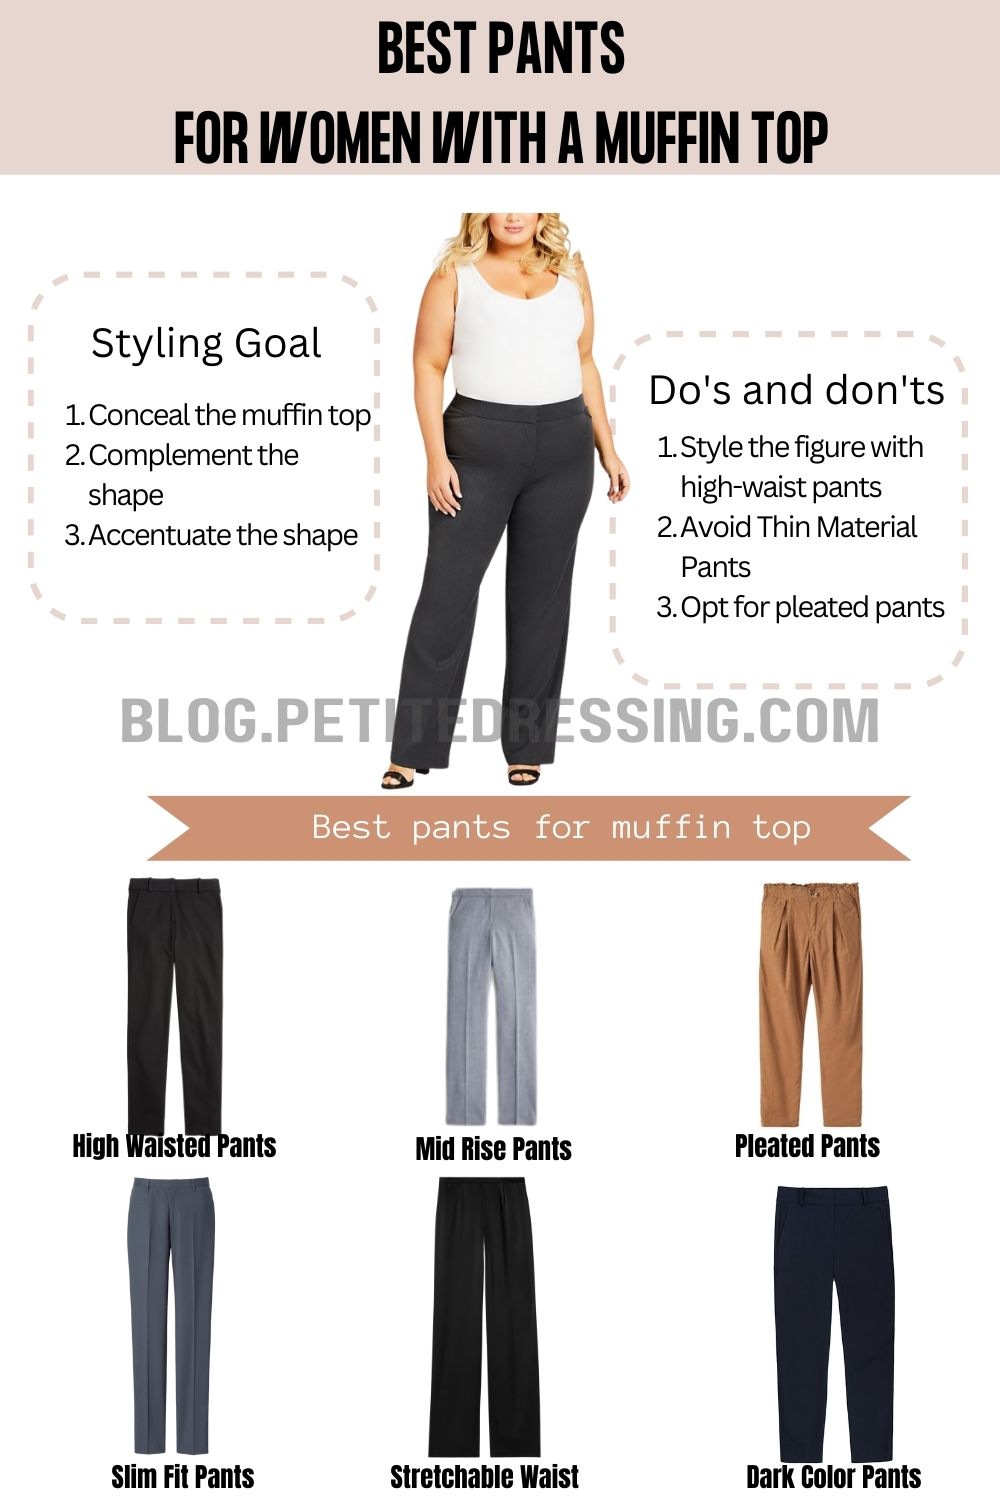 https://blog.petitedressing.com/wp-content/uploads/2022/11/The-Ultimate-Pants-Guide-for-Women-with-a-Muffin-Top-1.jpg